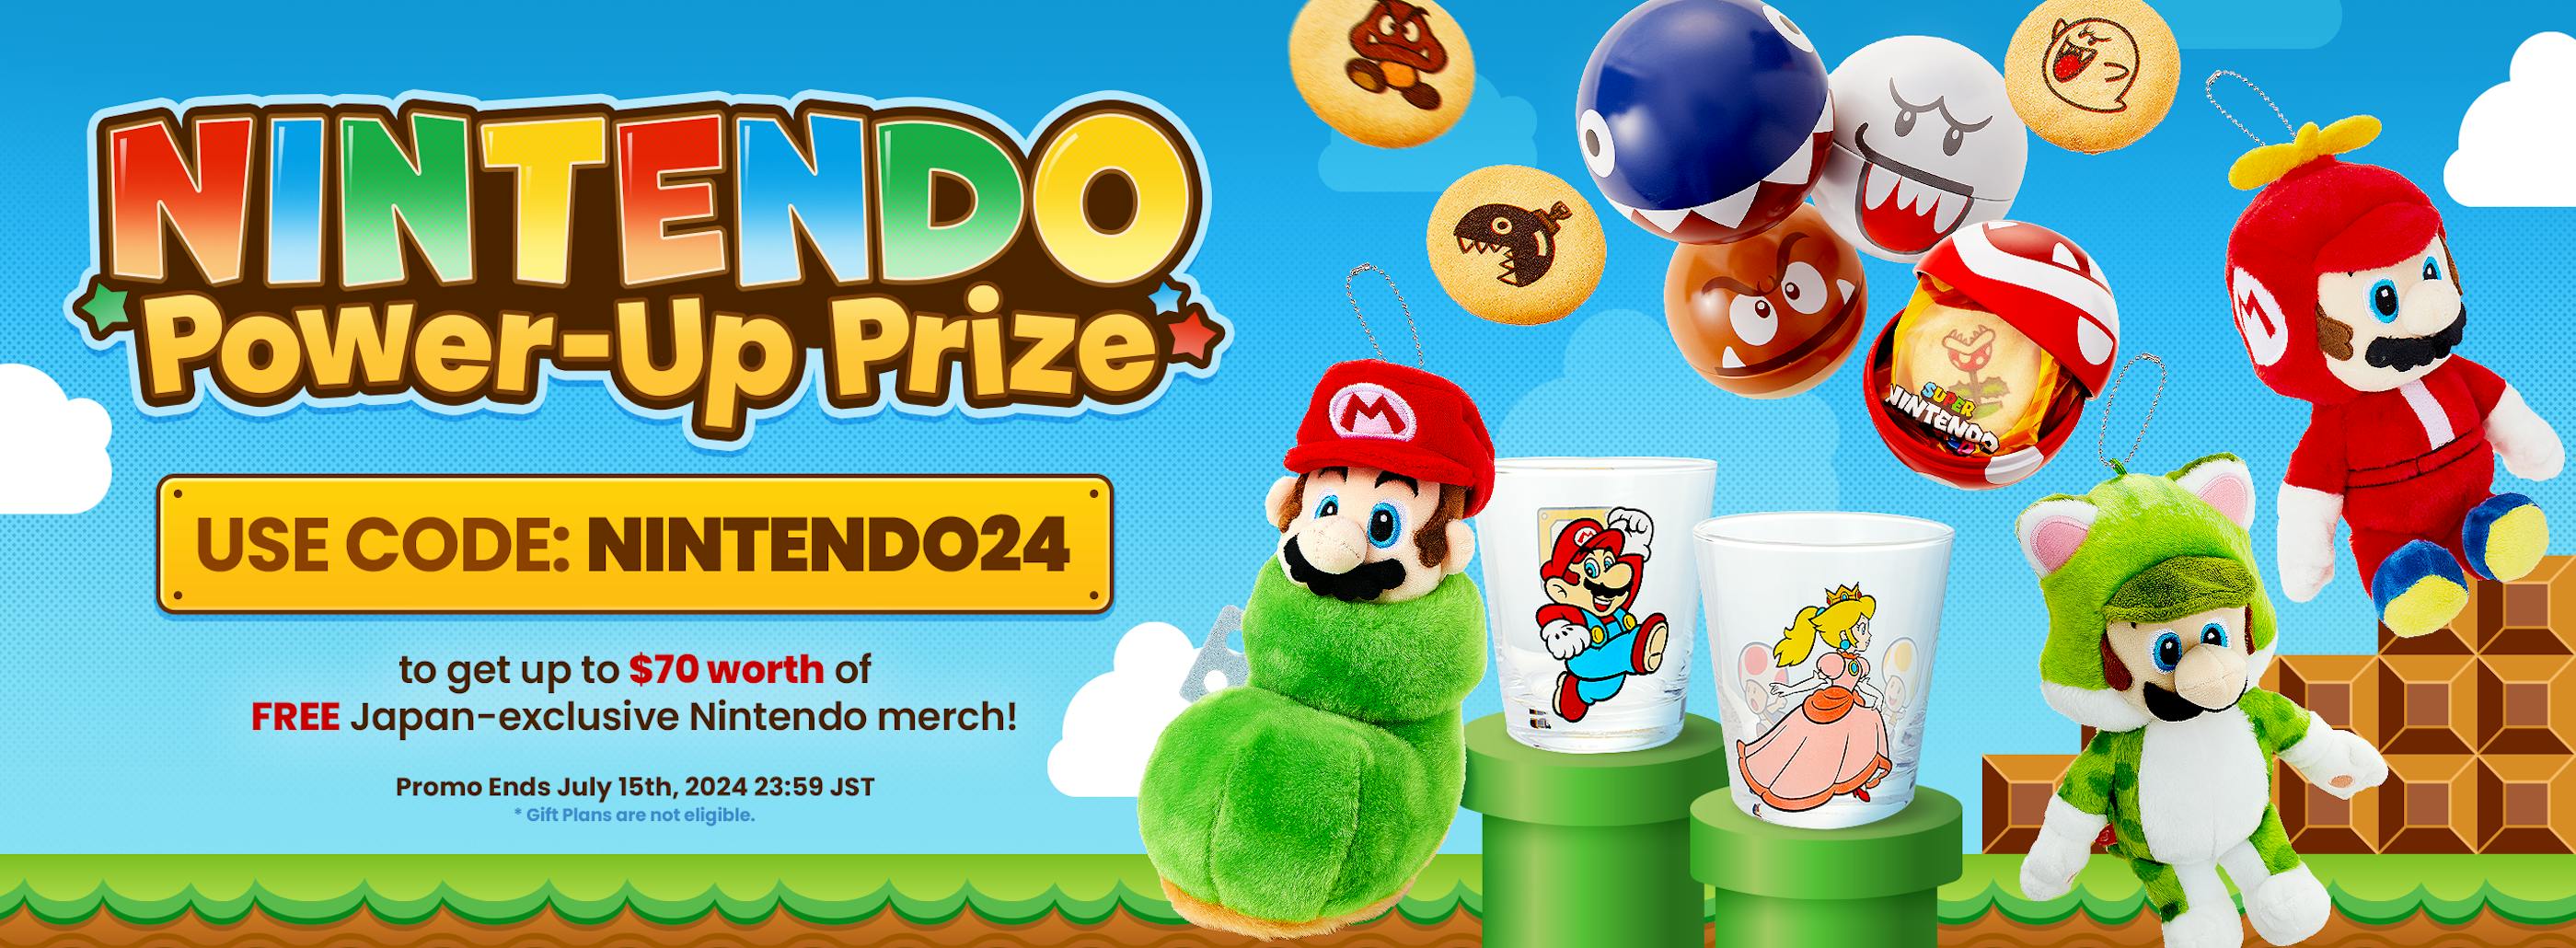 TokyoTreat's Nintendo Power-Up Prize promotion with featured Japan-exclusive items.